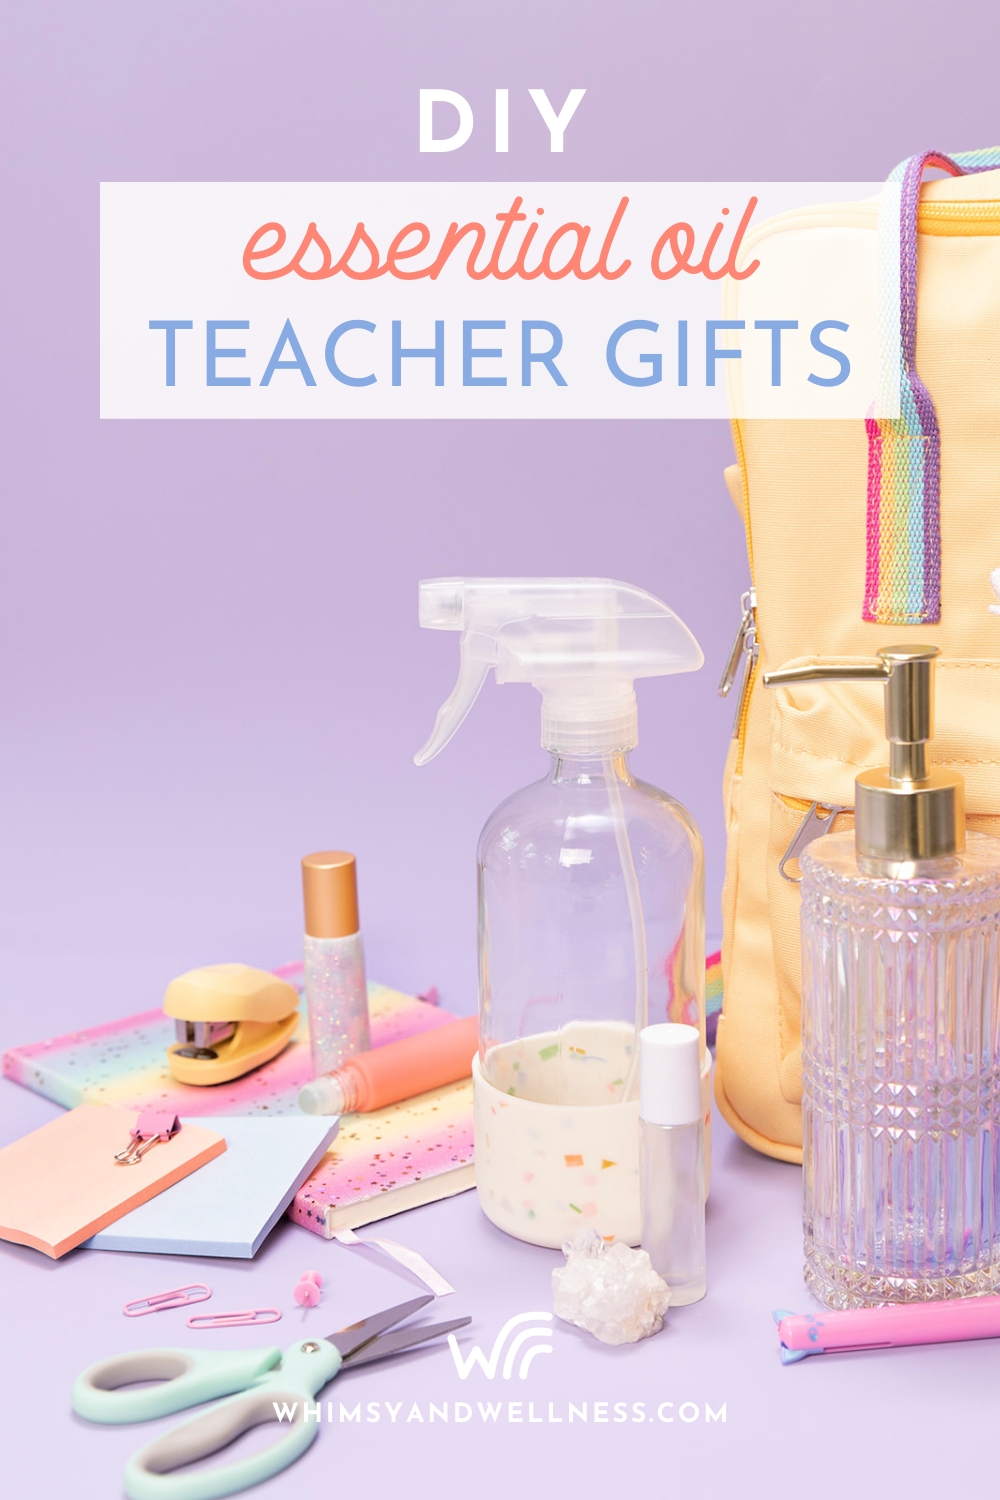 Gift the school year your best with DIY teacher gifts